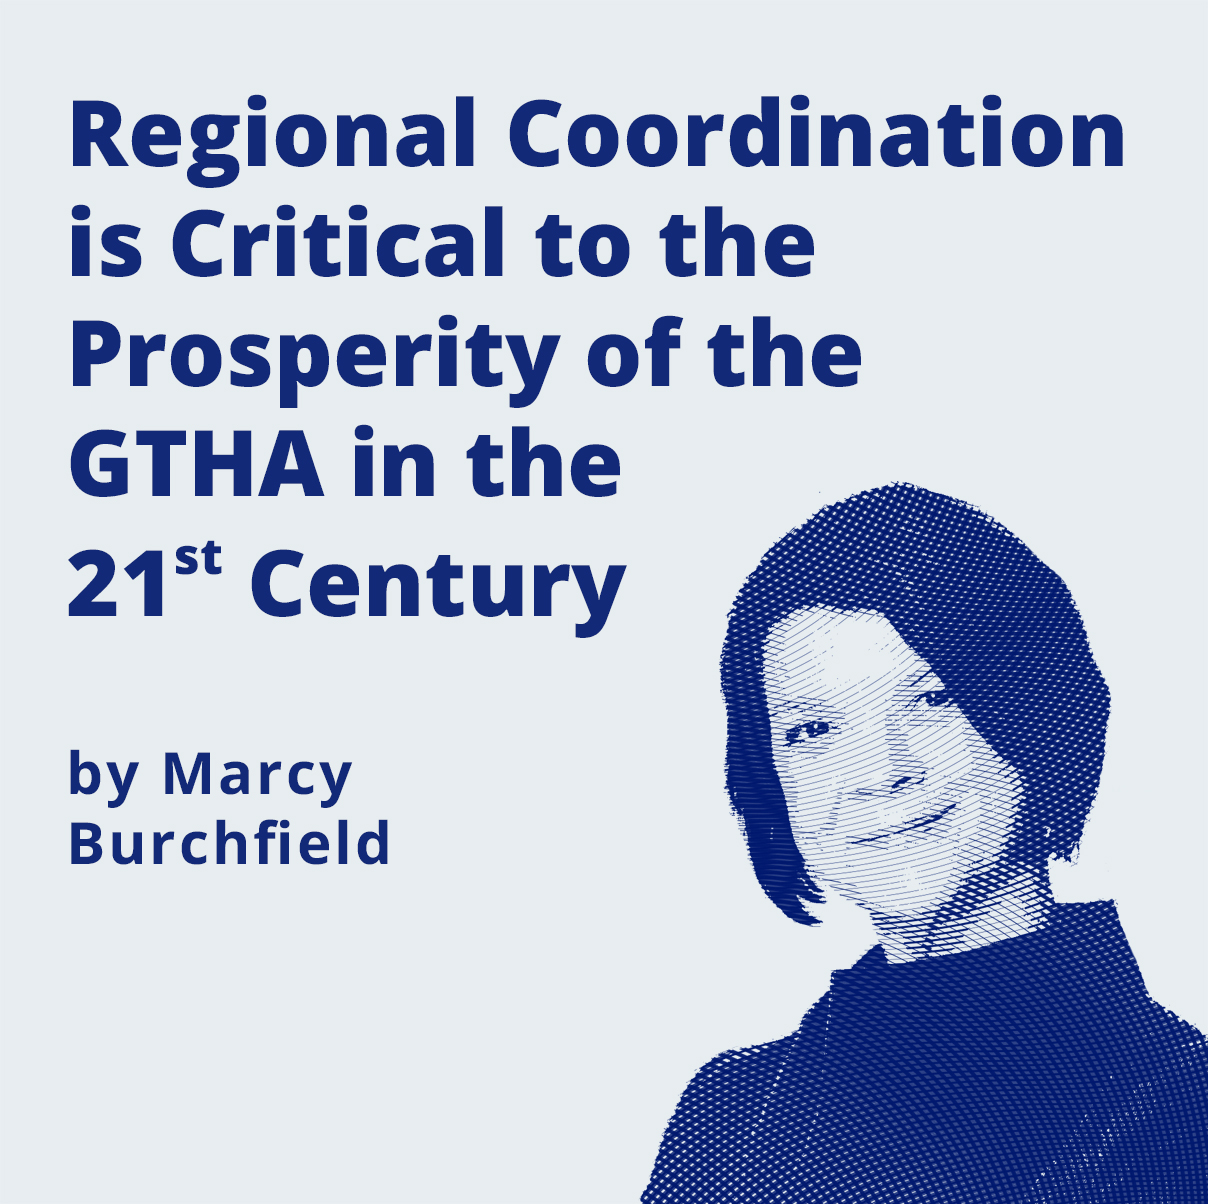 Regional Coordination is Critical to the Prosperity of the GTHA in the 21st Century by Marcy Burchfield